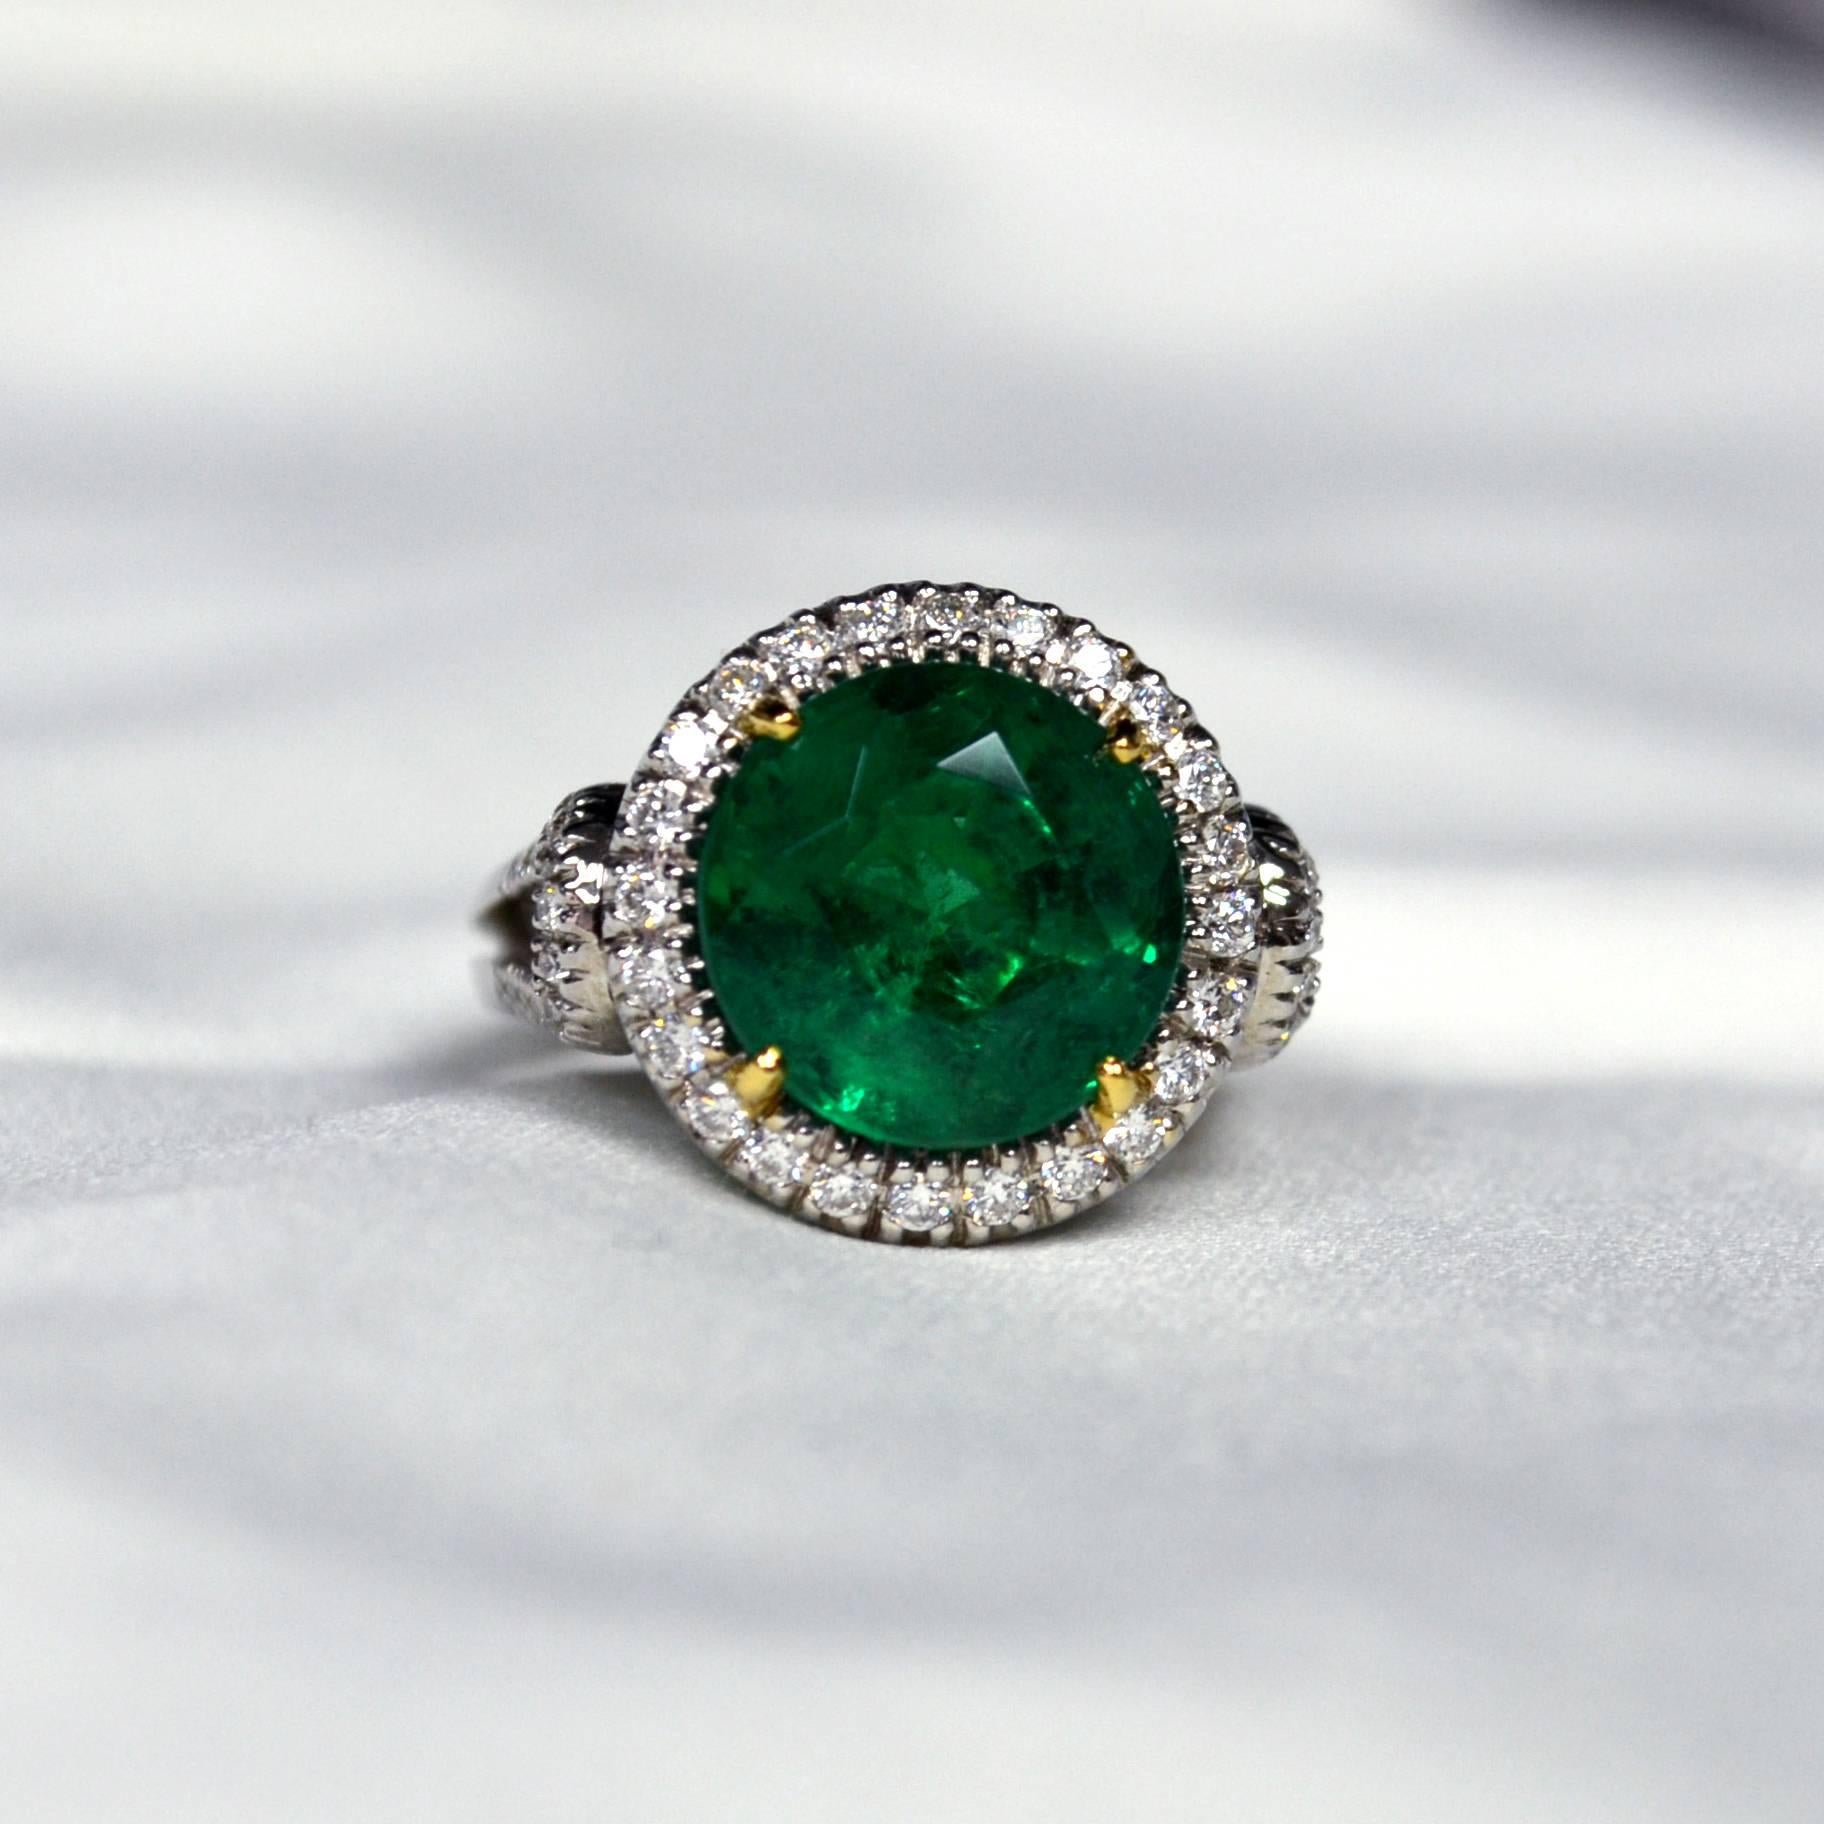 Ring in 18 karat white gold set with a round cut Zambian Emerald (5.59 carat) and 58 round brilliant-cut diamonds (0.48 carats).

Ring US Size 6.5
*Complimentary resizing service* 